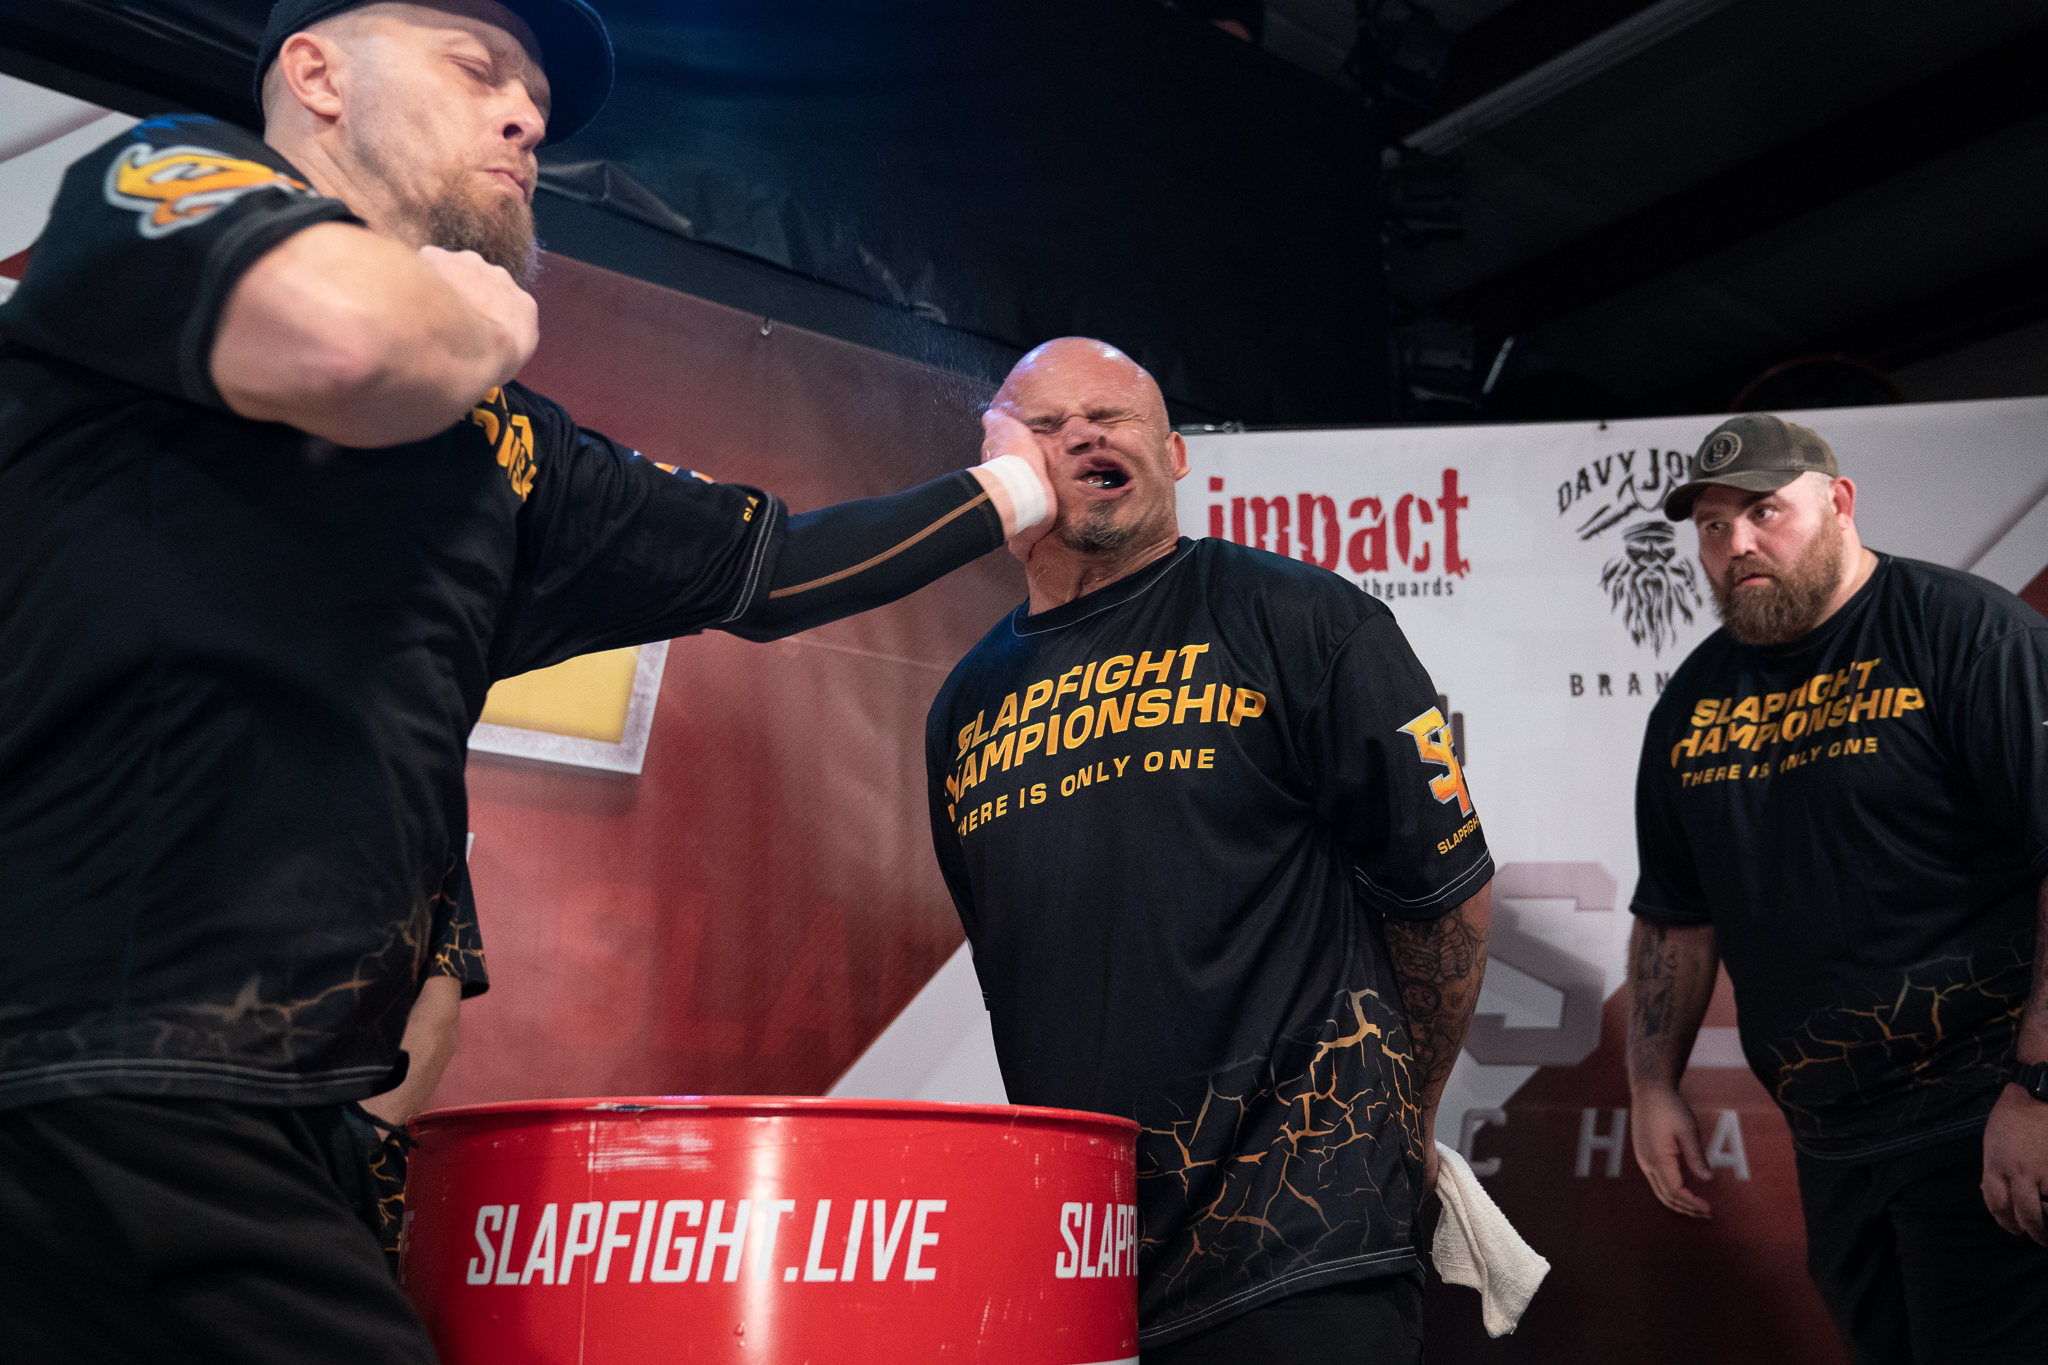 A competitor being slapped at SlapFight Championships